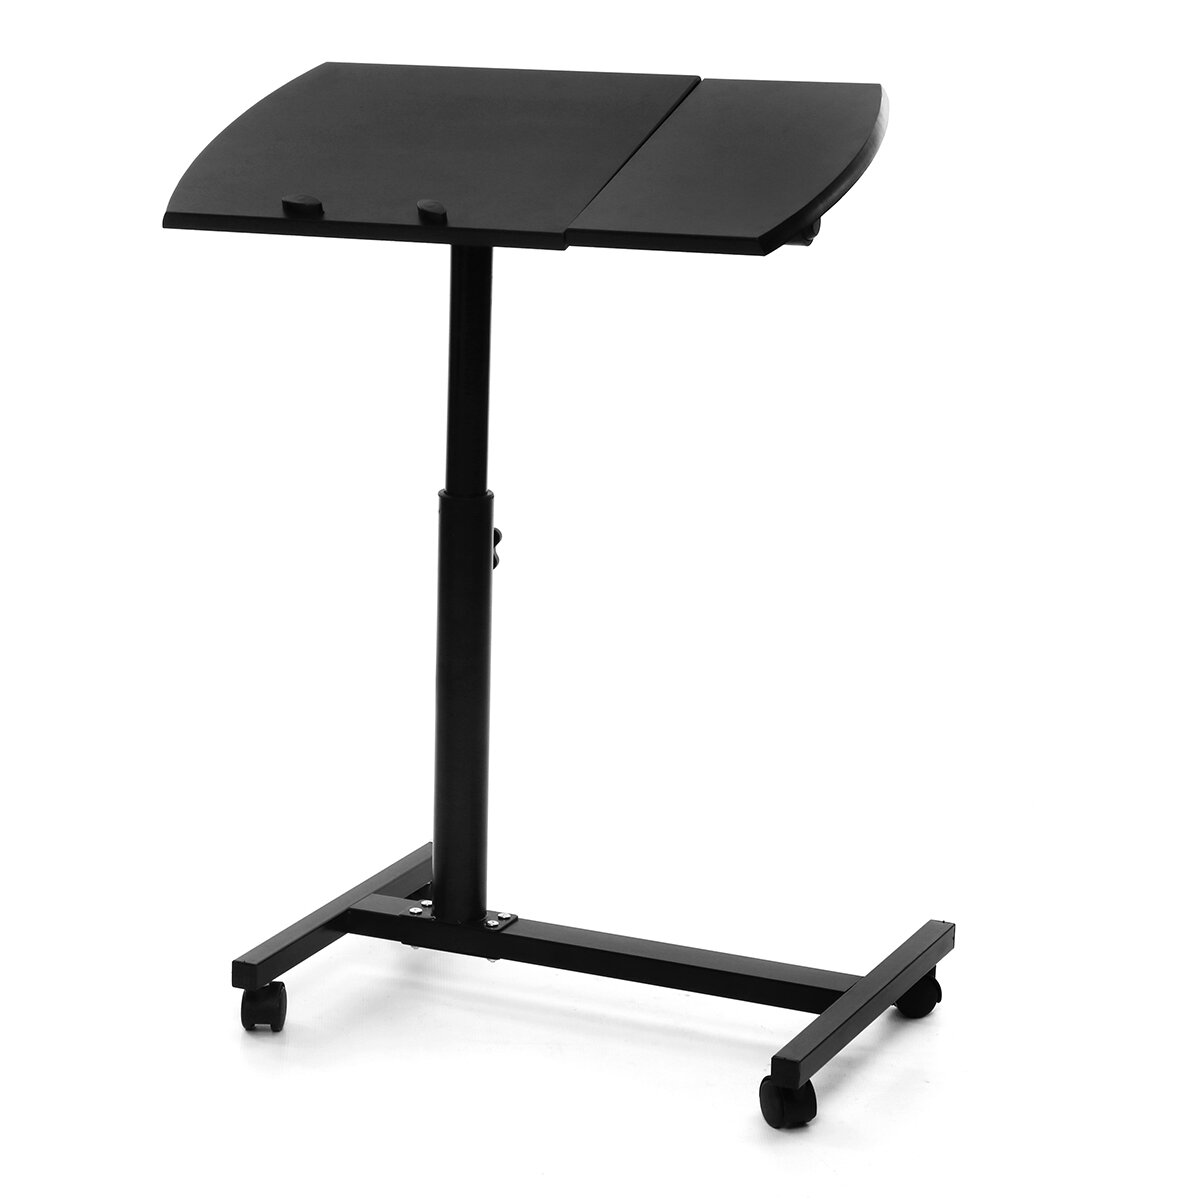 Adjustable Height Laptop Stand Rolling Cart Desk Computertable